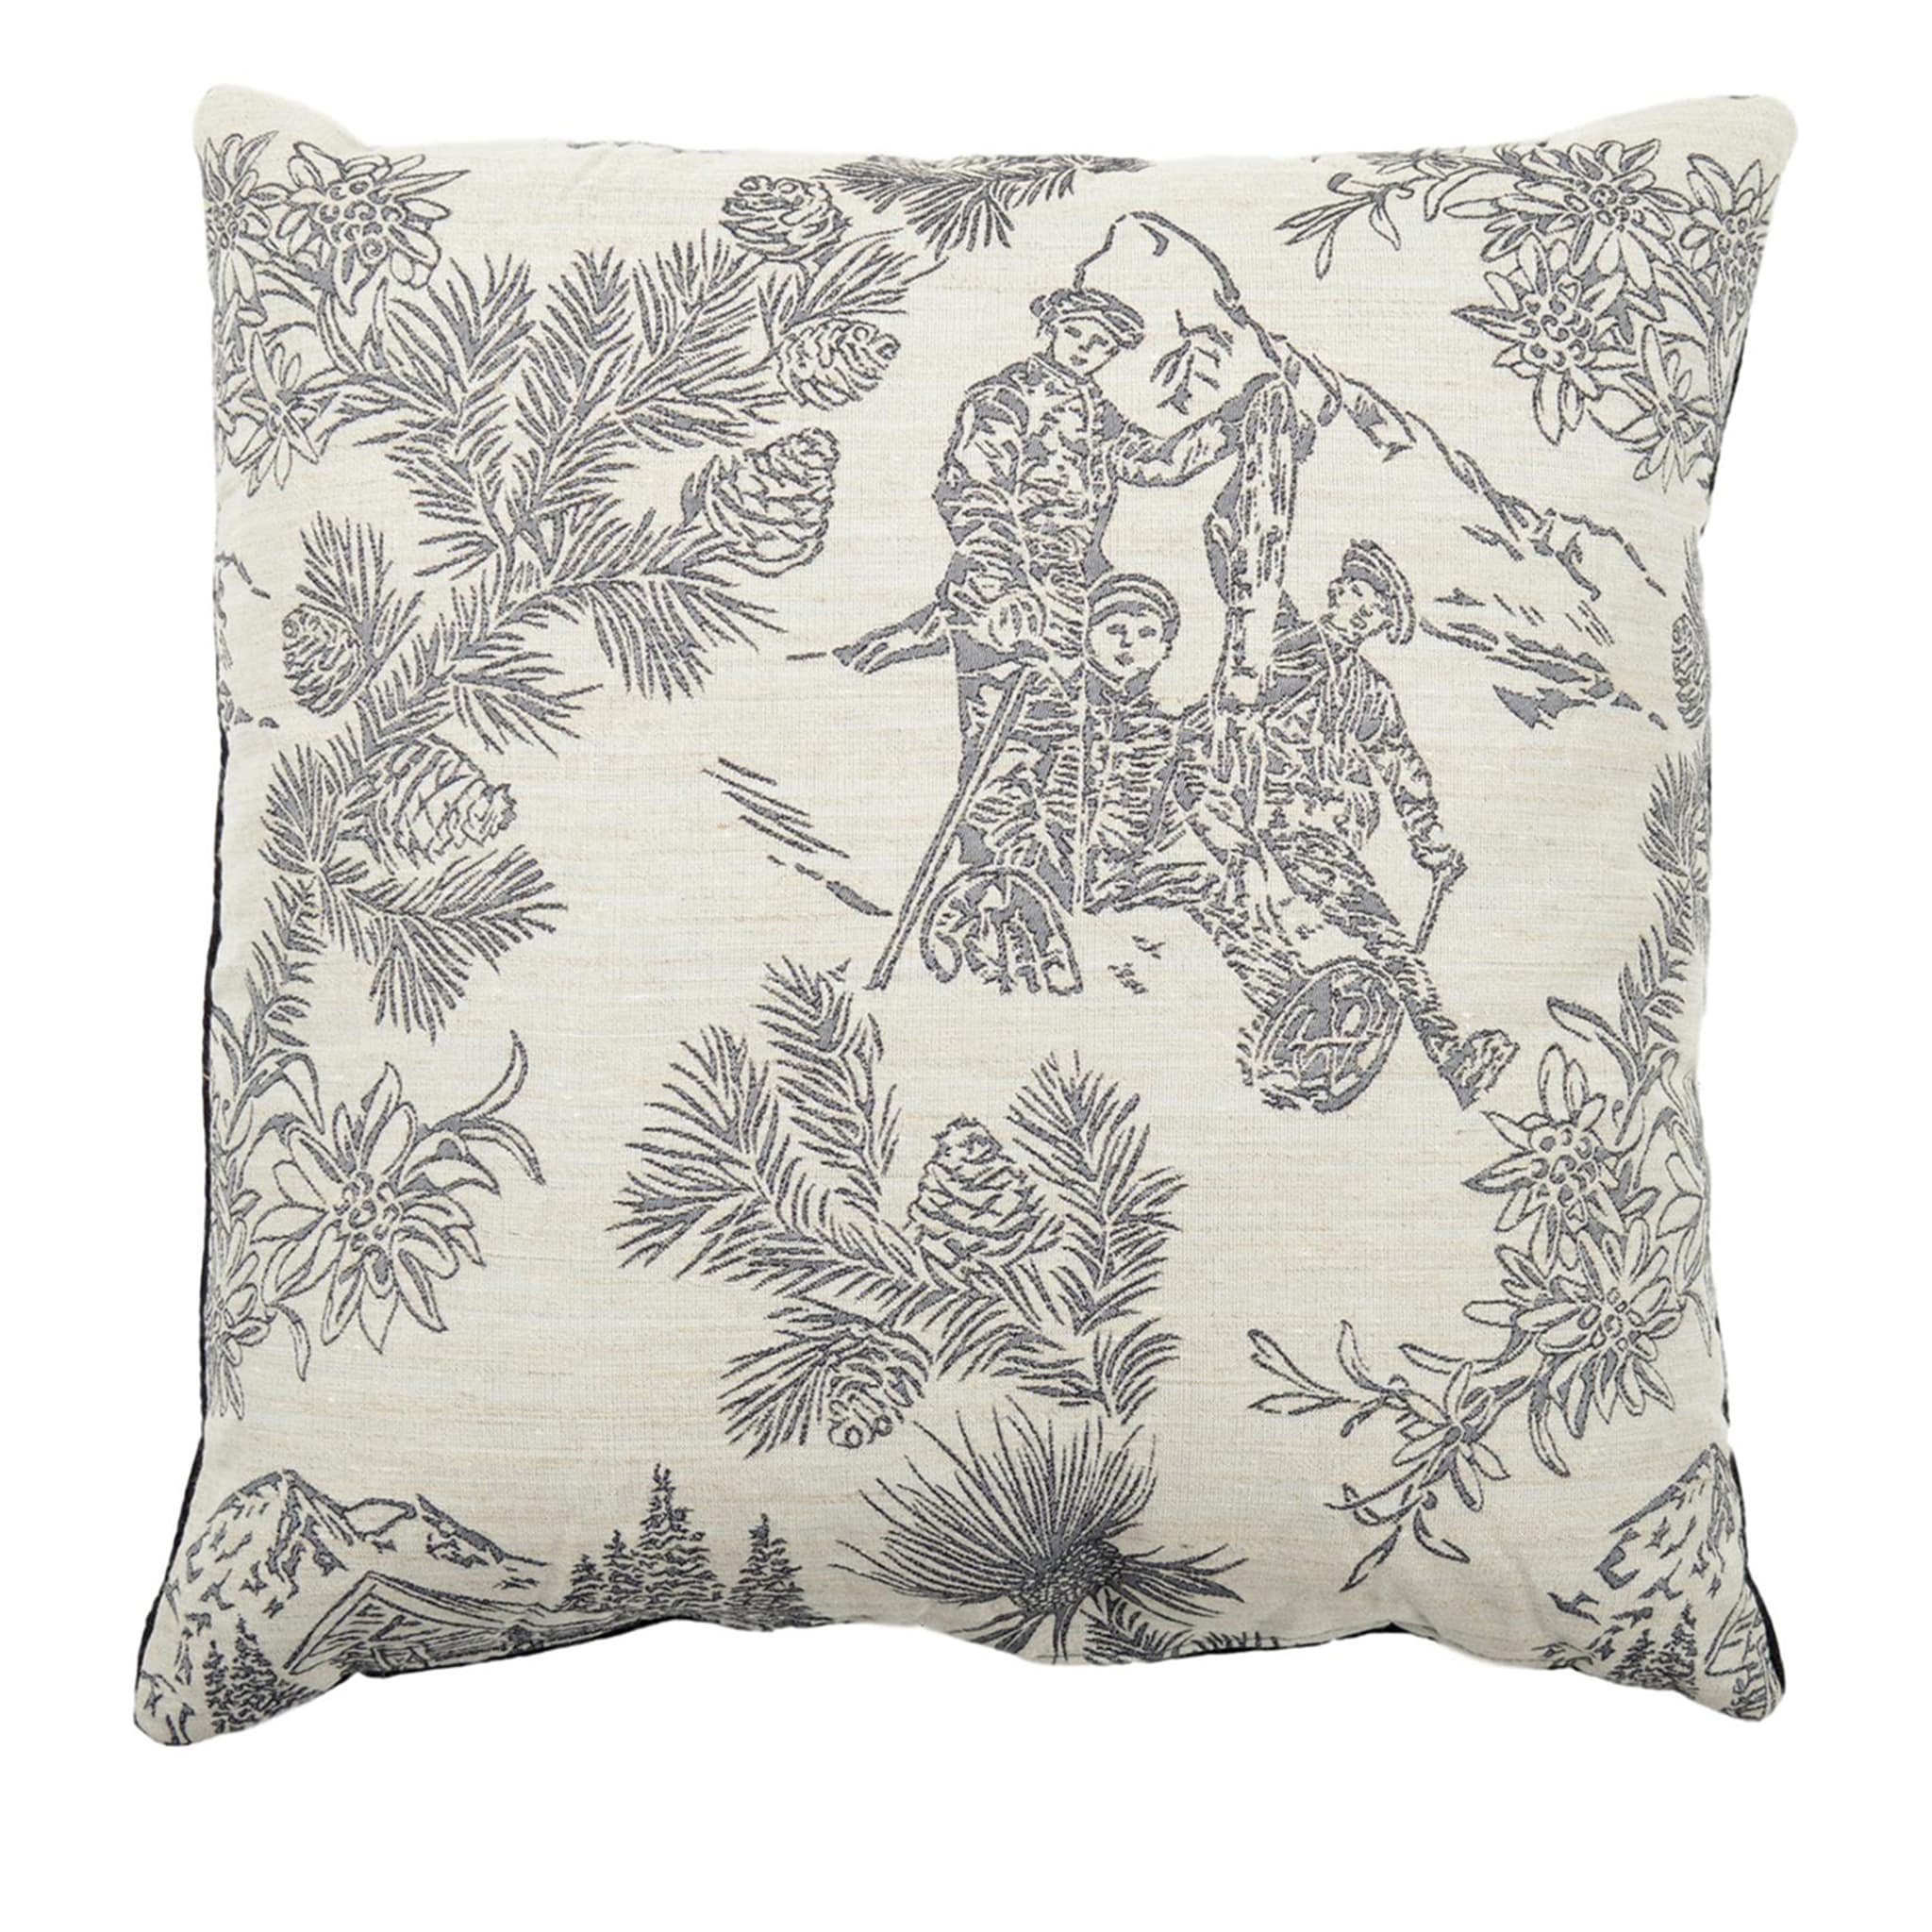 Black and White Carré Cushion in toile de jouy jacquard fabric - Main view